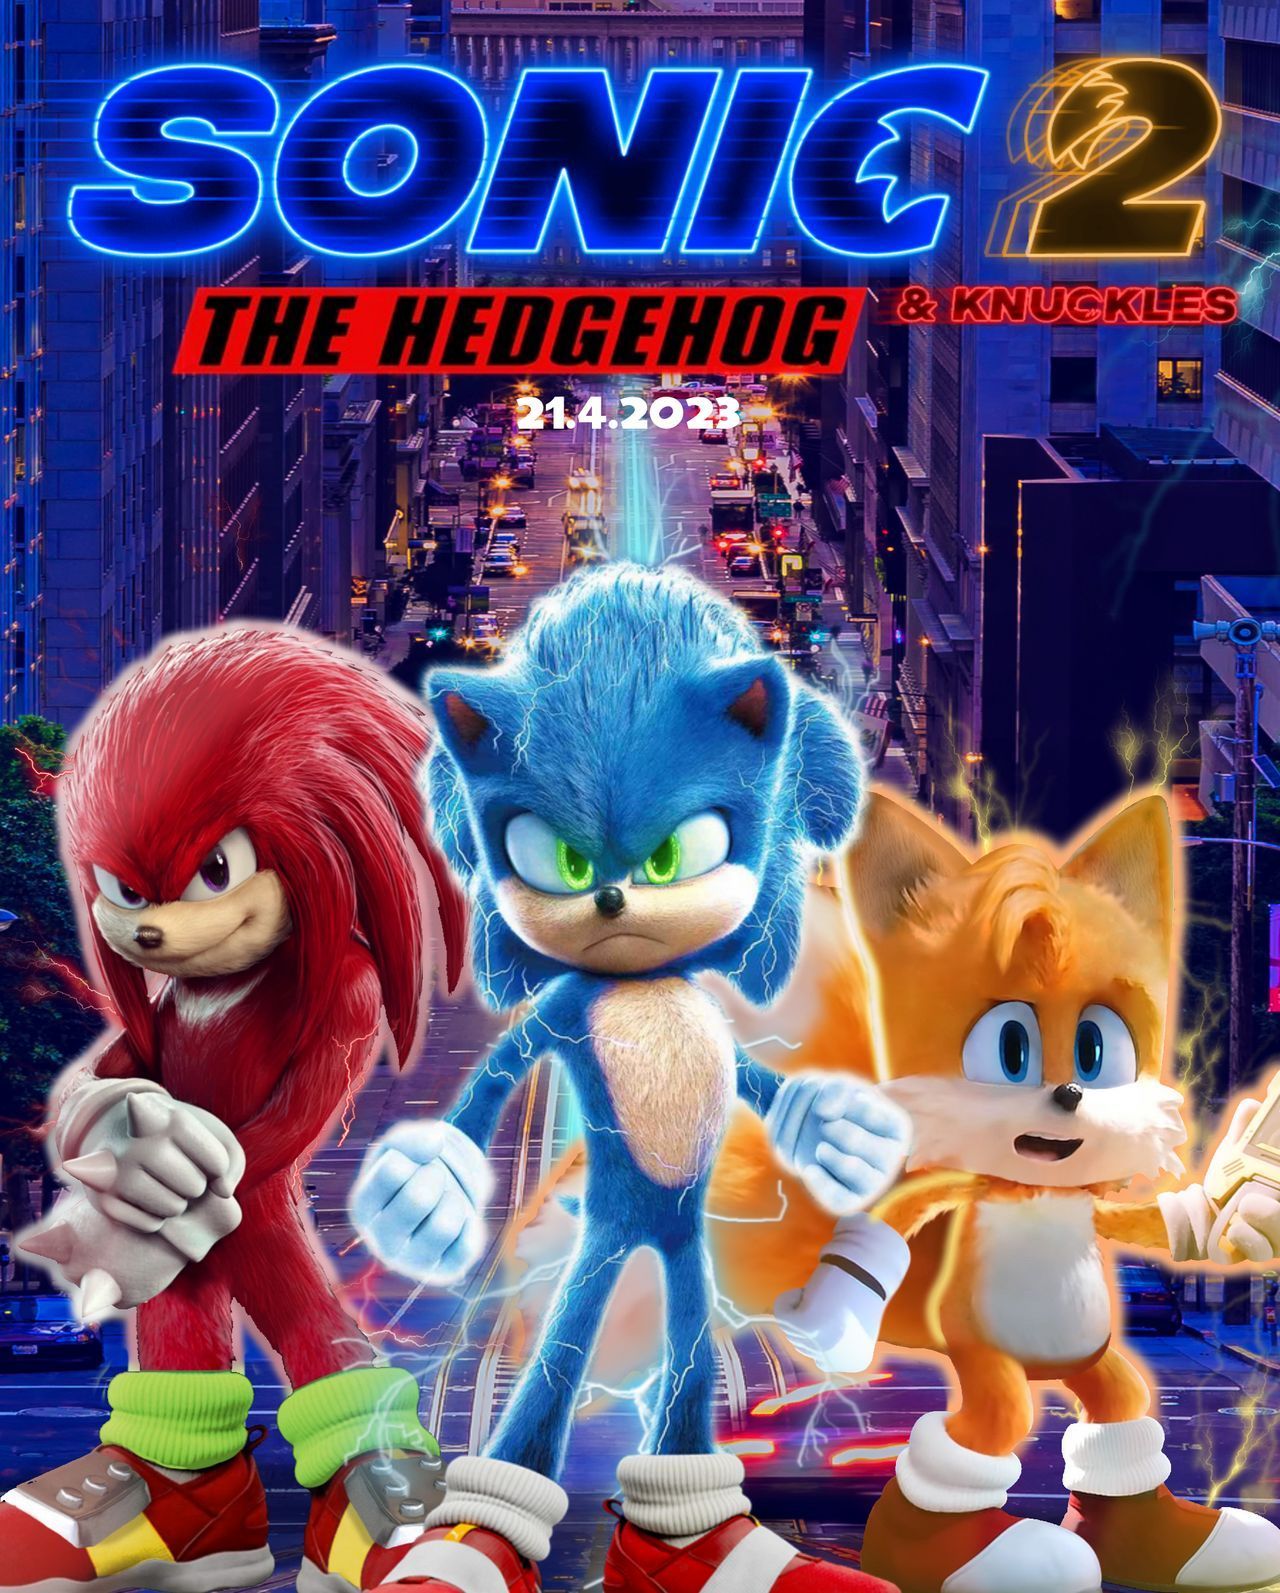 Sonic the Hedgehog 2 wallpaper by TheSpawner97  Download on ZEDGE  e3da